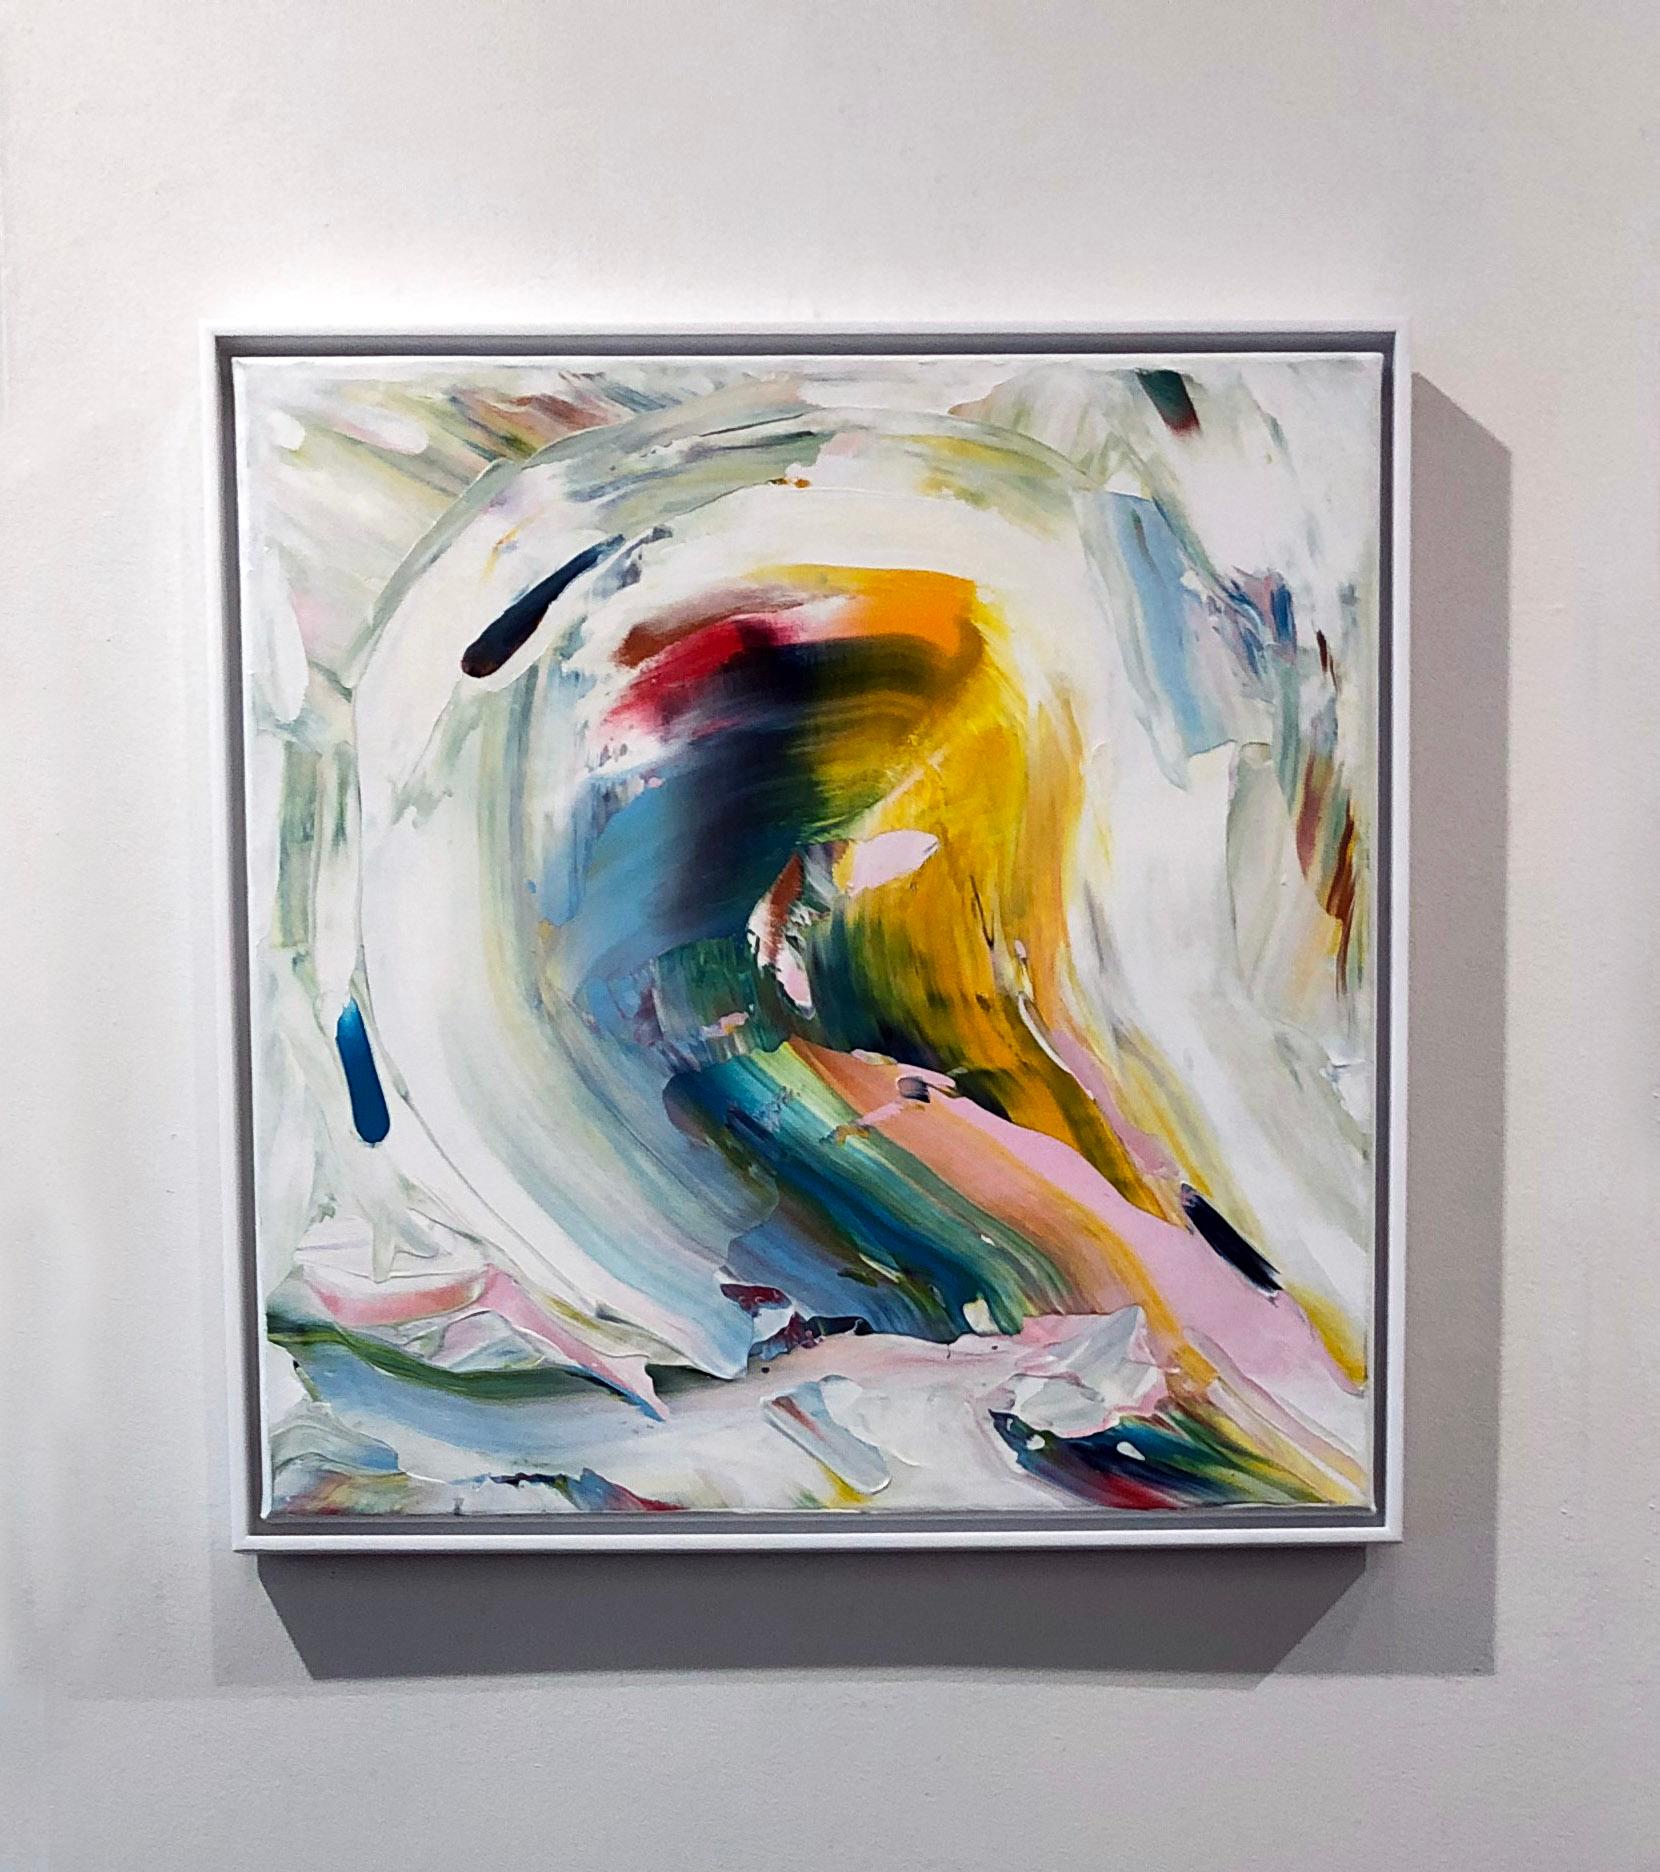 'Wait For Me II ' from the Made In New York series, 2020 by Norwegian artist, Marit Geraldine Bostad. Acrylic on canvas, 21 x 21 in. Departing from her usual palette of warm, Nordic colors, Bostad’s painting features an explosion of vivid colors.